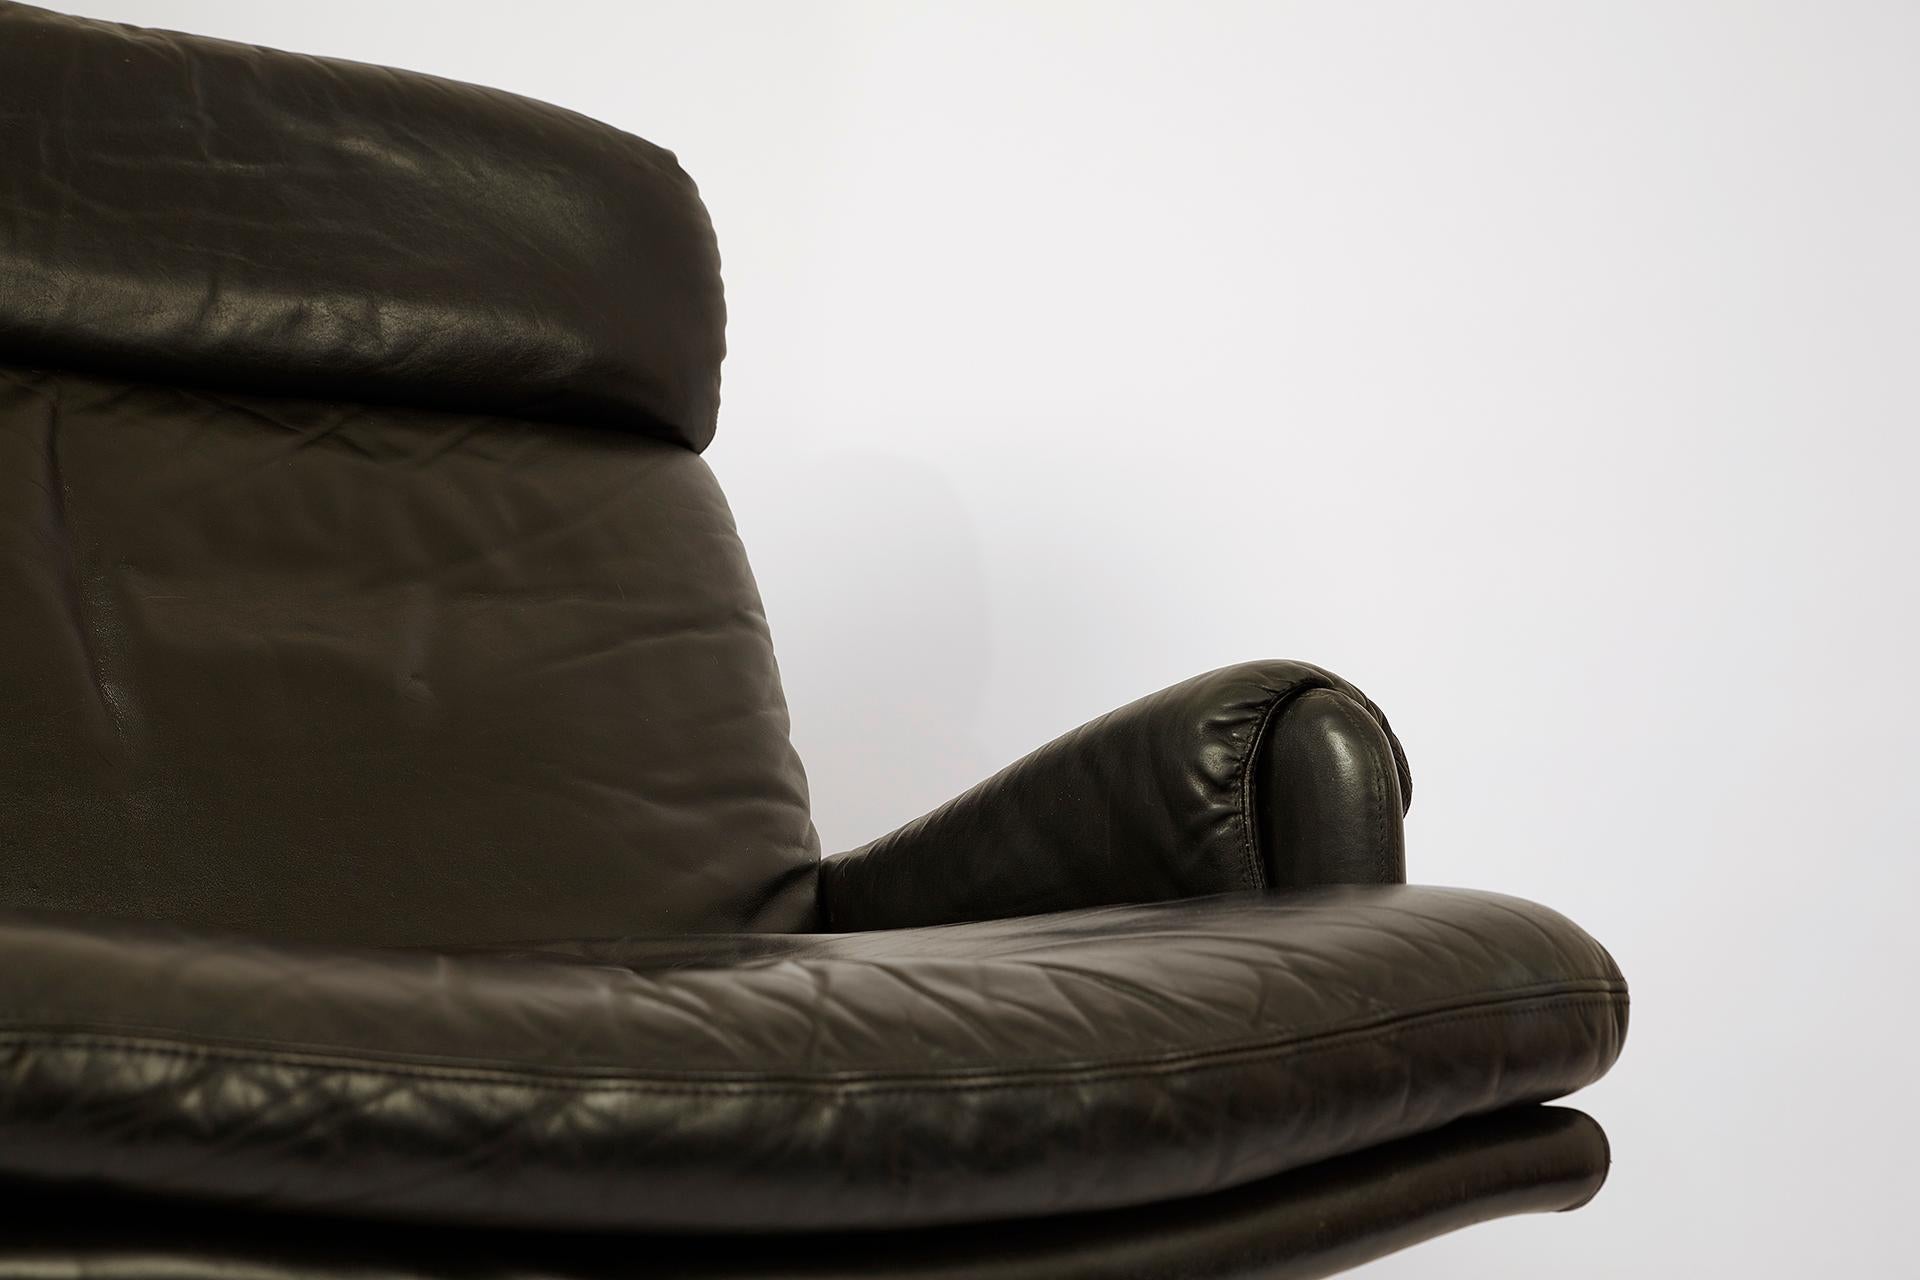 Swiss Comfortable and Elegant 1970s Black Leather Lounge Chair, Switzerland